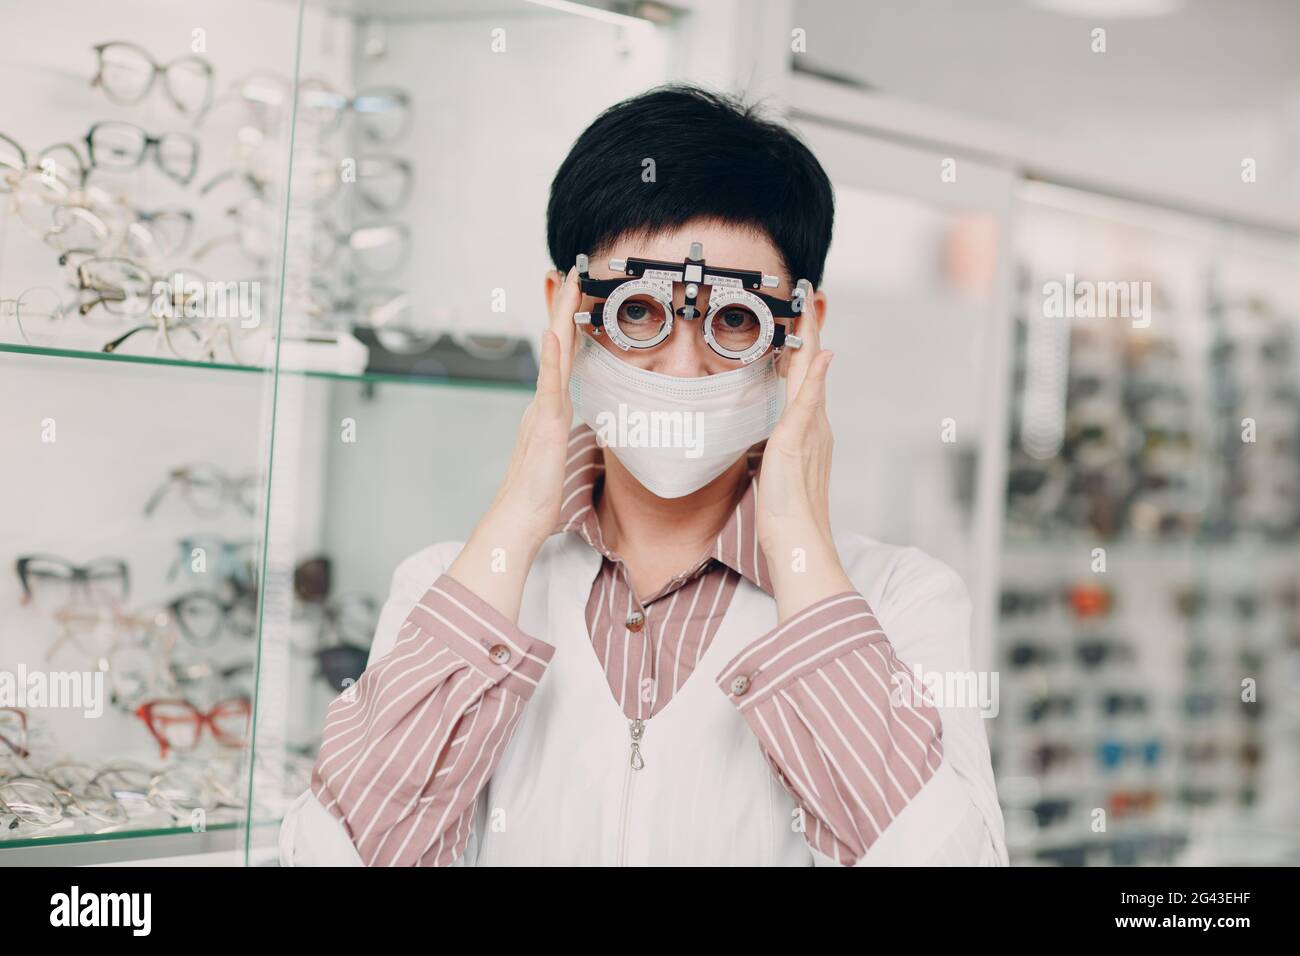 Portrait of an optometrist ophthalmologist middle aged woman wearing protective medical face mask Stock Photo